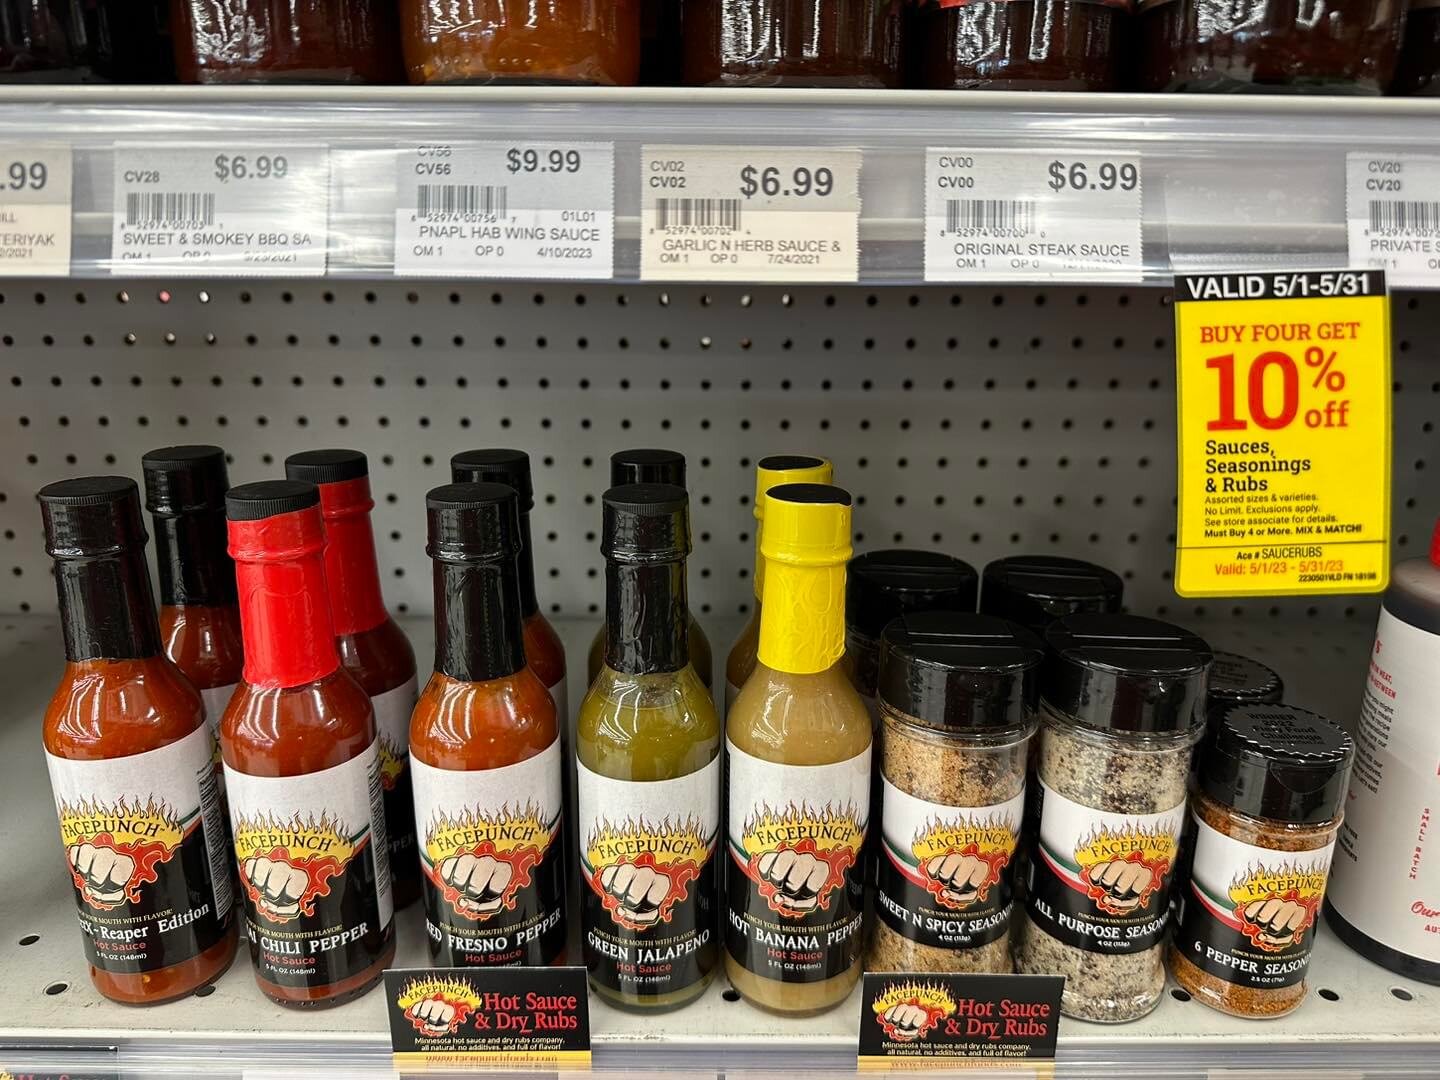 Just restocked Stillwater Ace Hardware in Stillwater MN. They have all the major players in the Facepunch line up, and keeping company with some serious brands too!

Come up and go full BBQ crazy and get restocked on Facepunch too! 

#flavors #madein